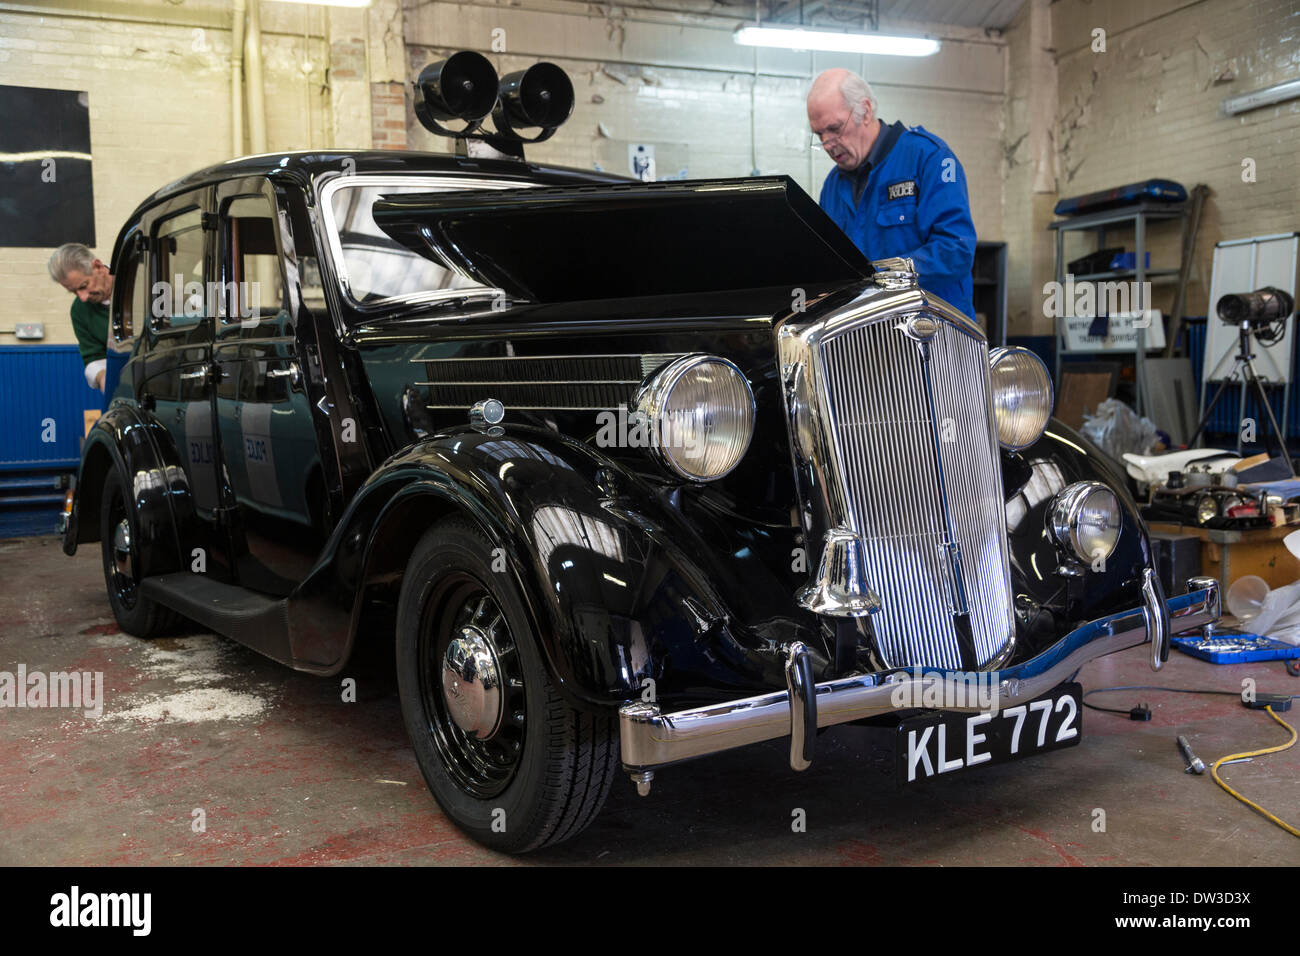 Hampton, Middlesex, UK. 26th February 2014. Preparing a classic police vehicle for a convoy run from Hampton Garage to New Scotland Yard, London. Credit:  Colin Hutchings/Alamy Live News Stock Photo